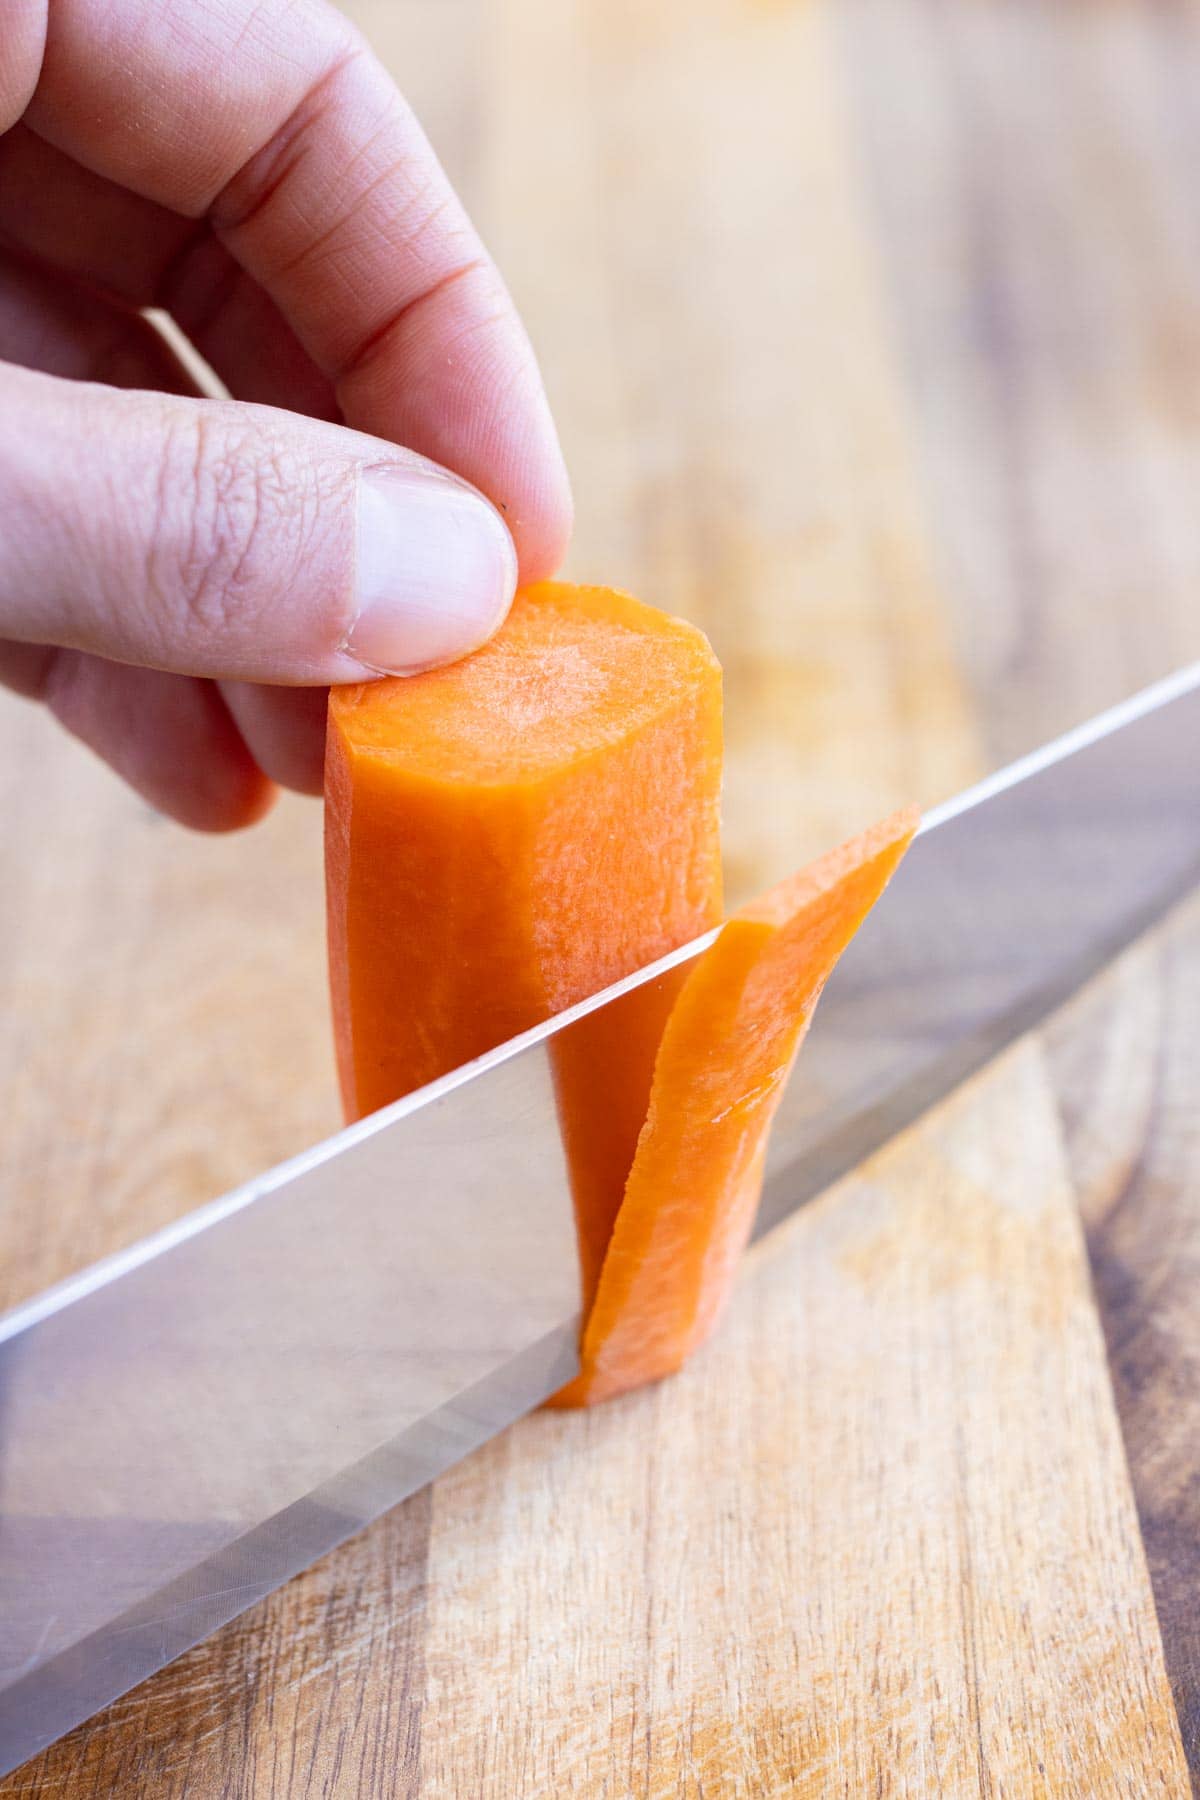 A knife is used to cut the carrot into thin strips on a cutting board.